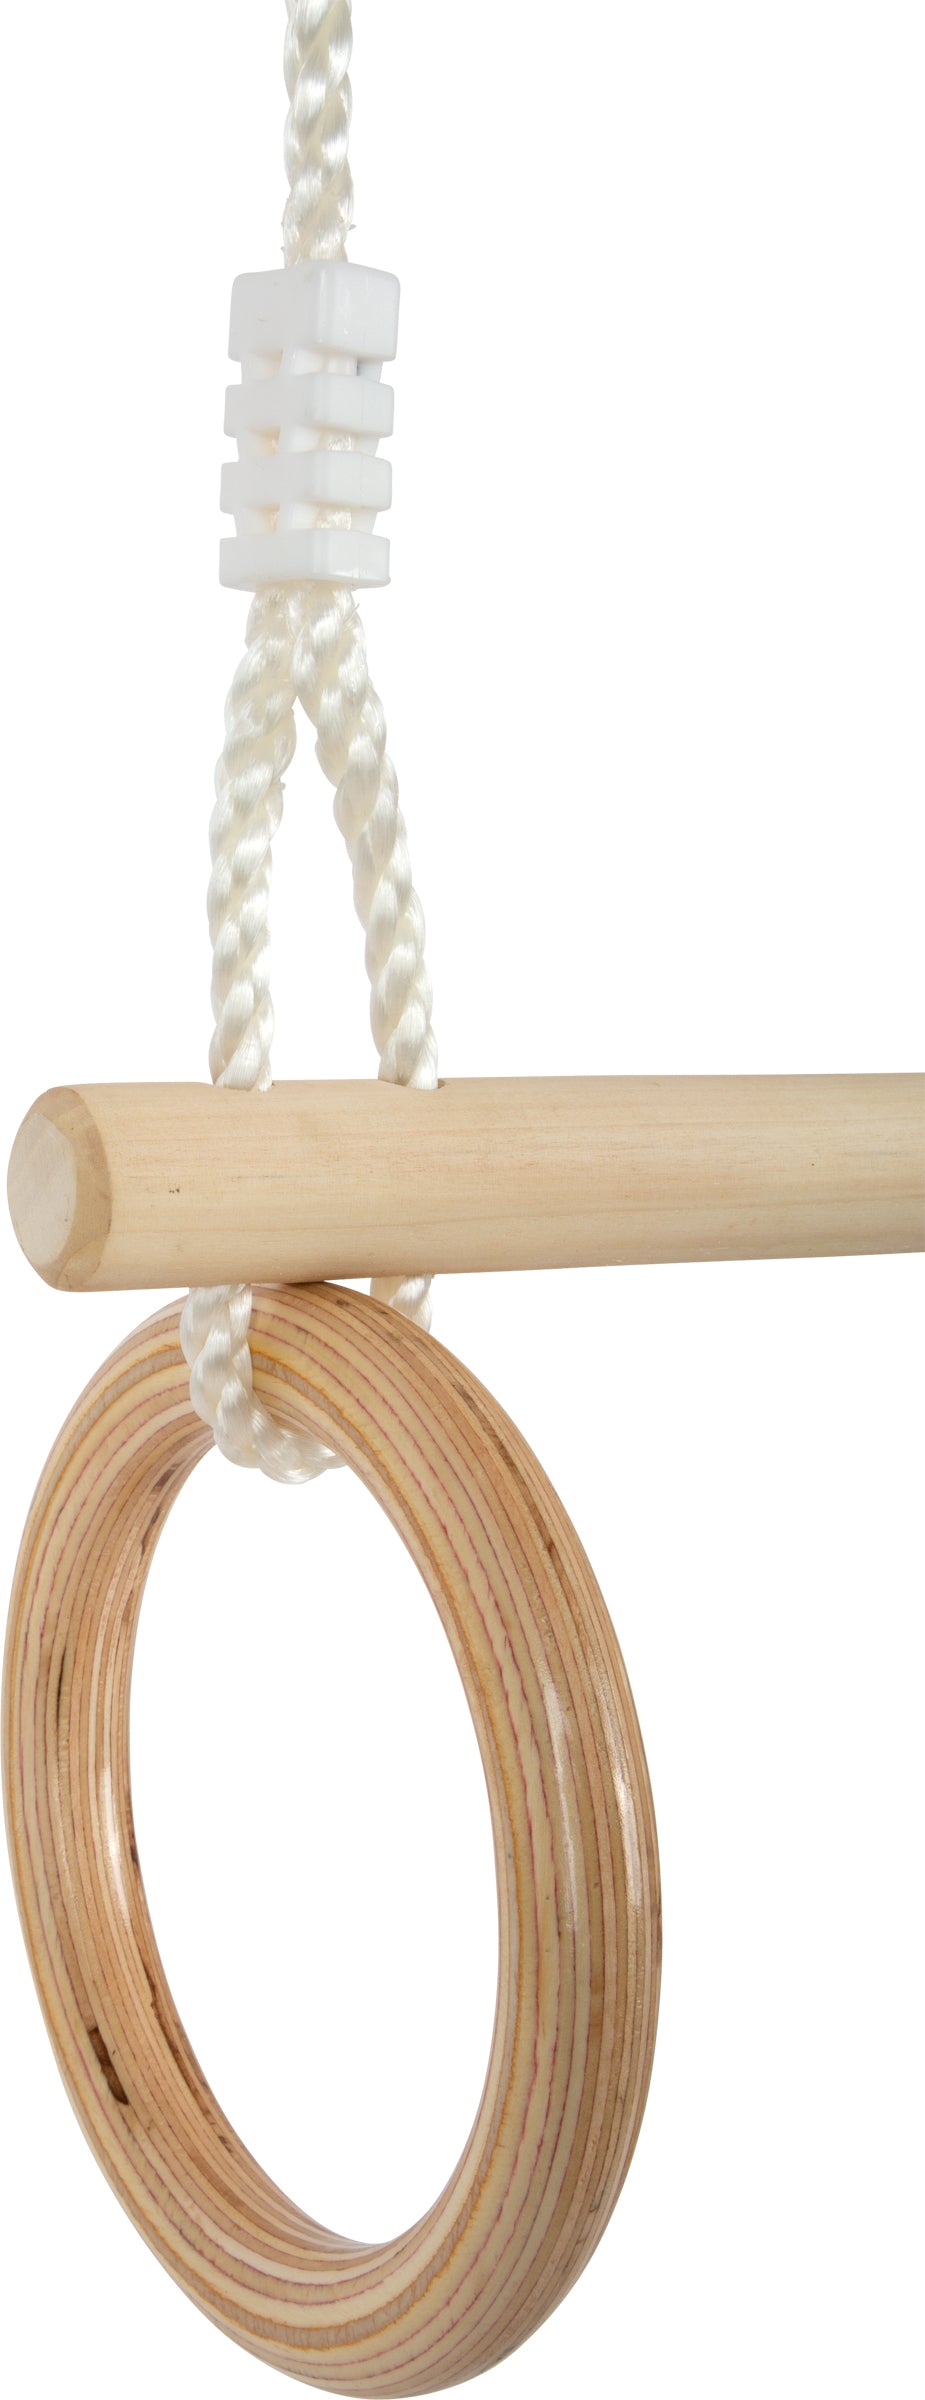 Small foot - Wooden Trapeze with Gymnastic Rings